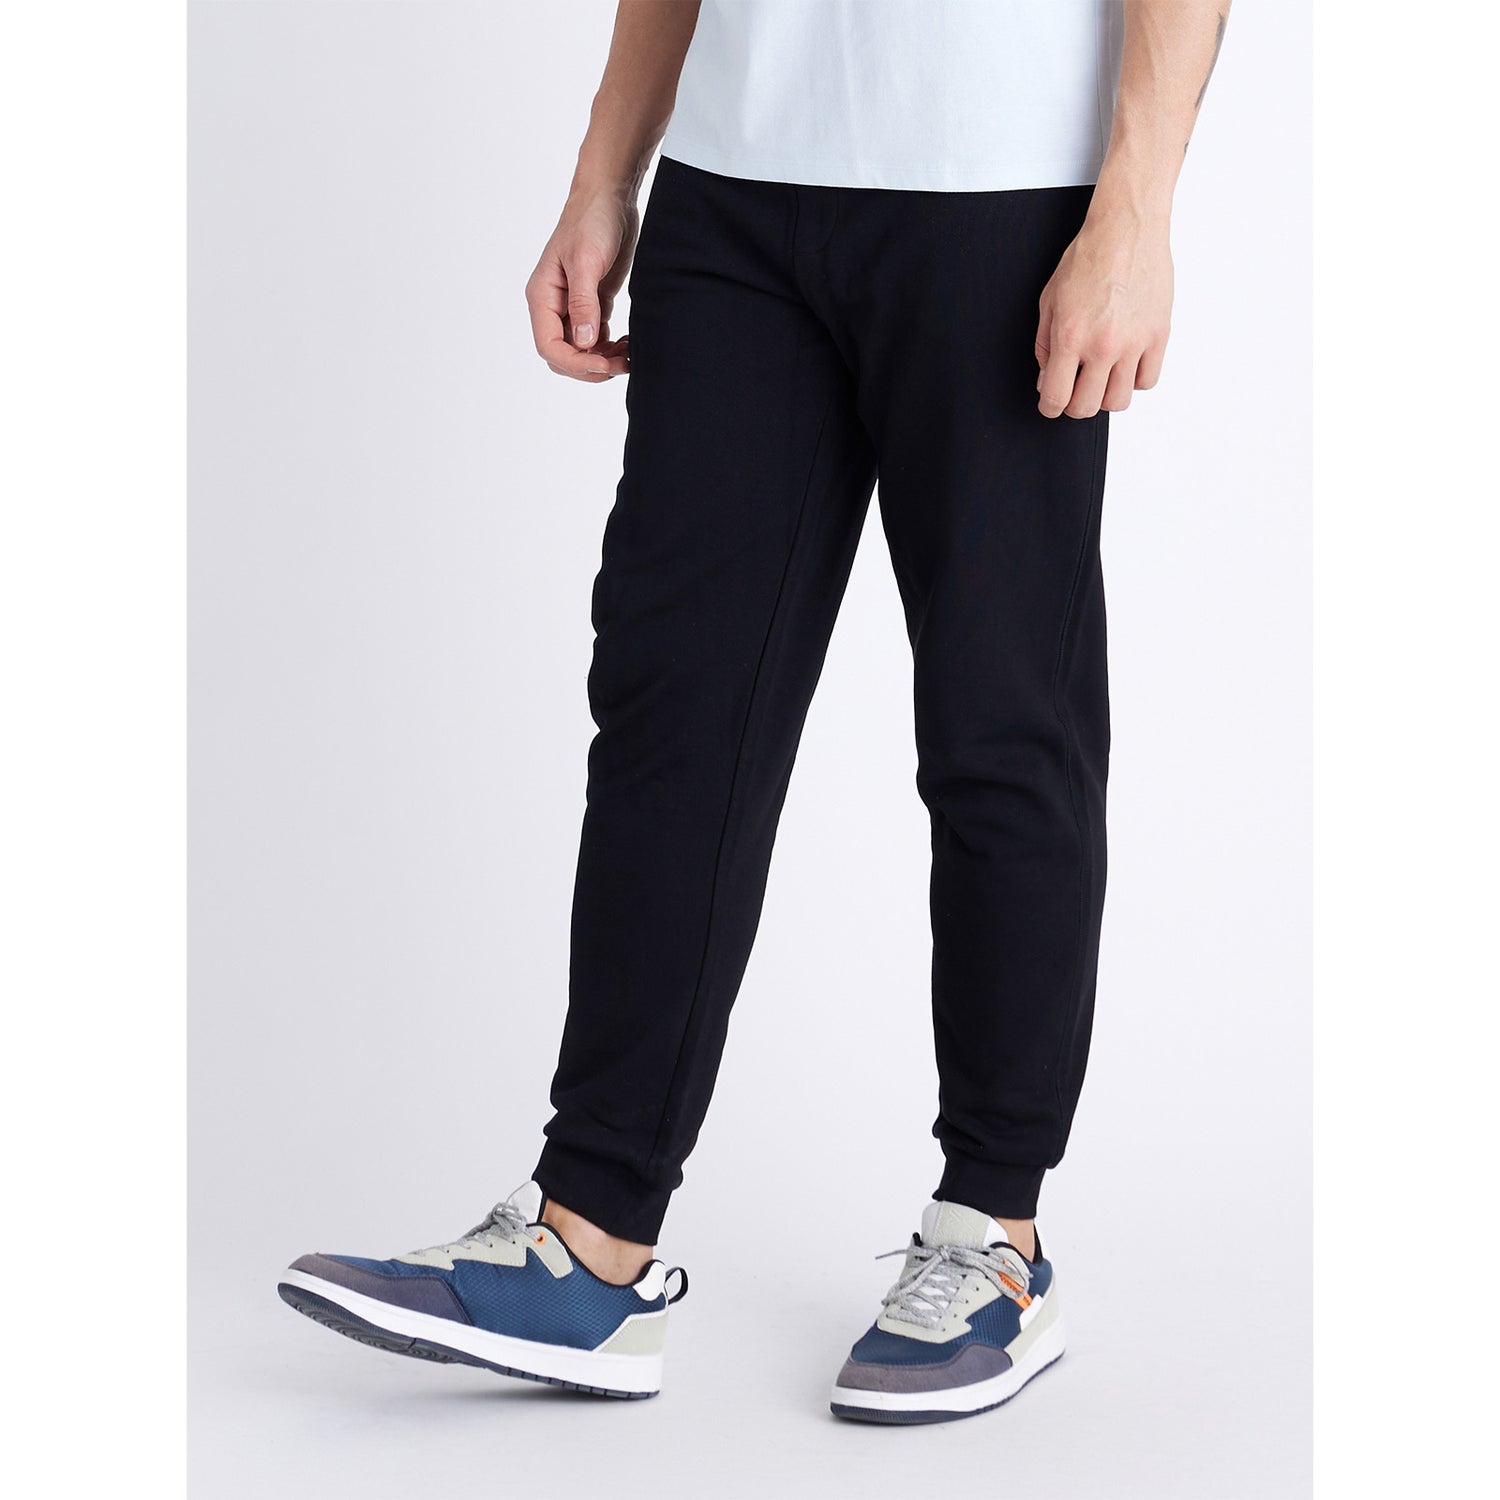 Mens Navy Solid Trouser (Various Sizes)